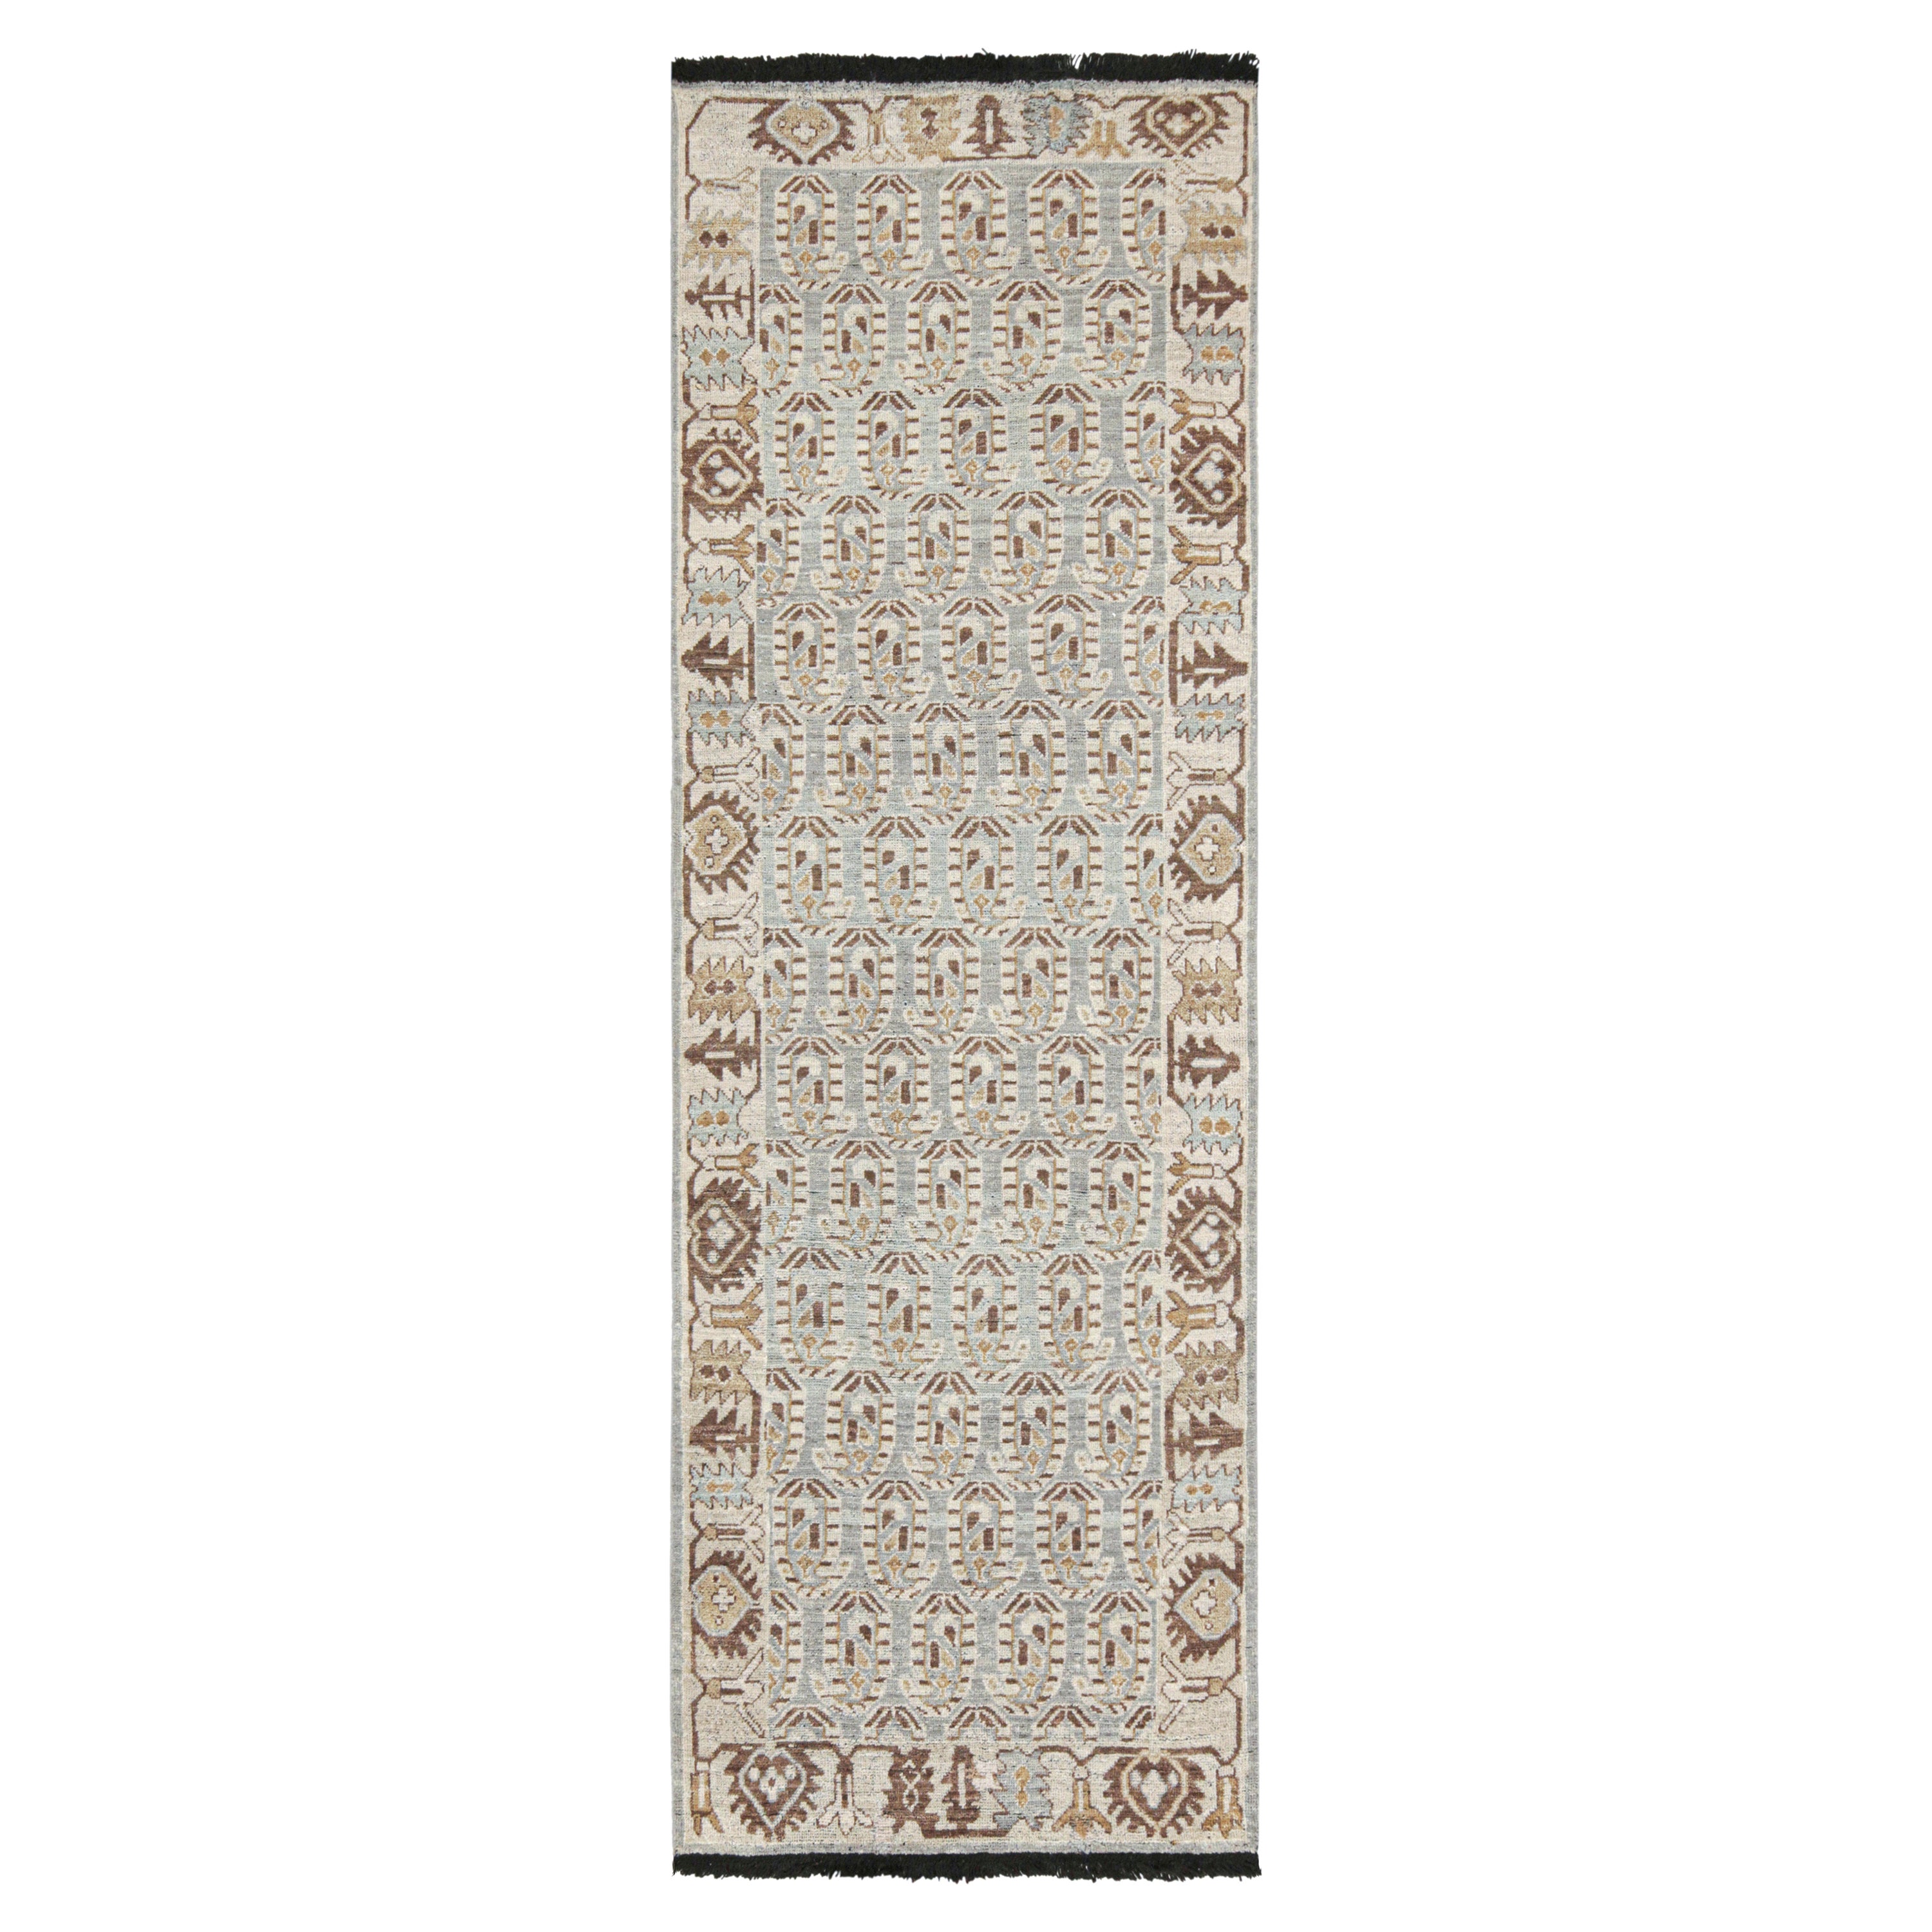 Rug & Kilim’s Tribal-Style Custom Runner with Paisley Patterns For Sale